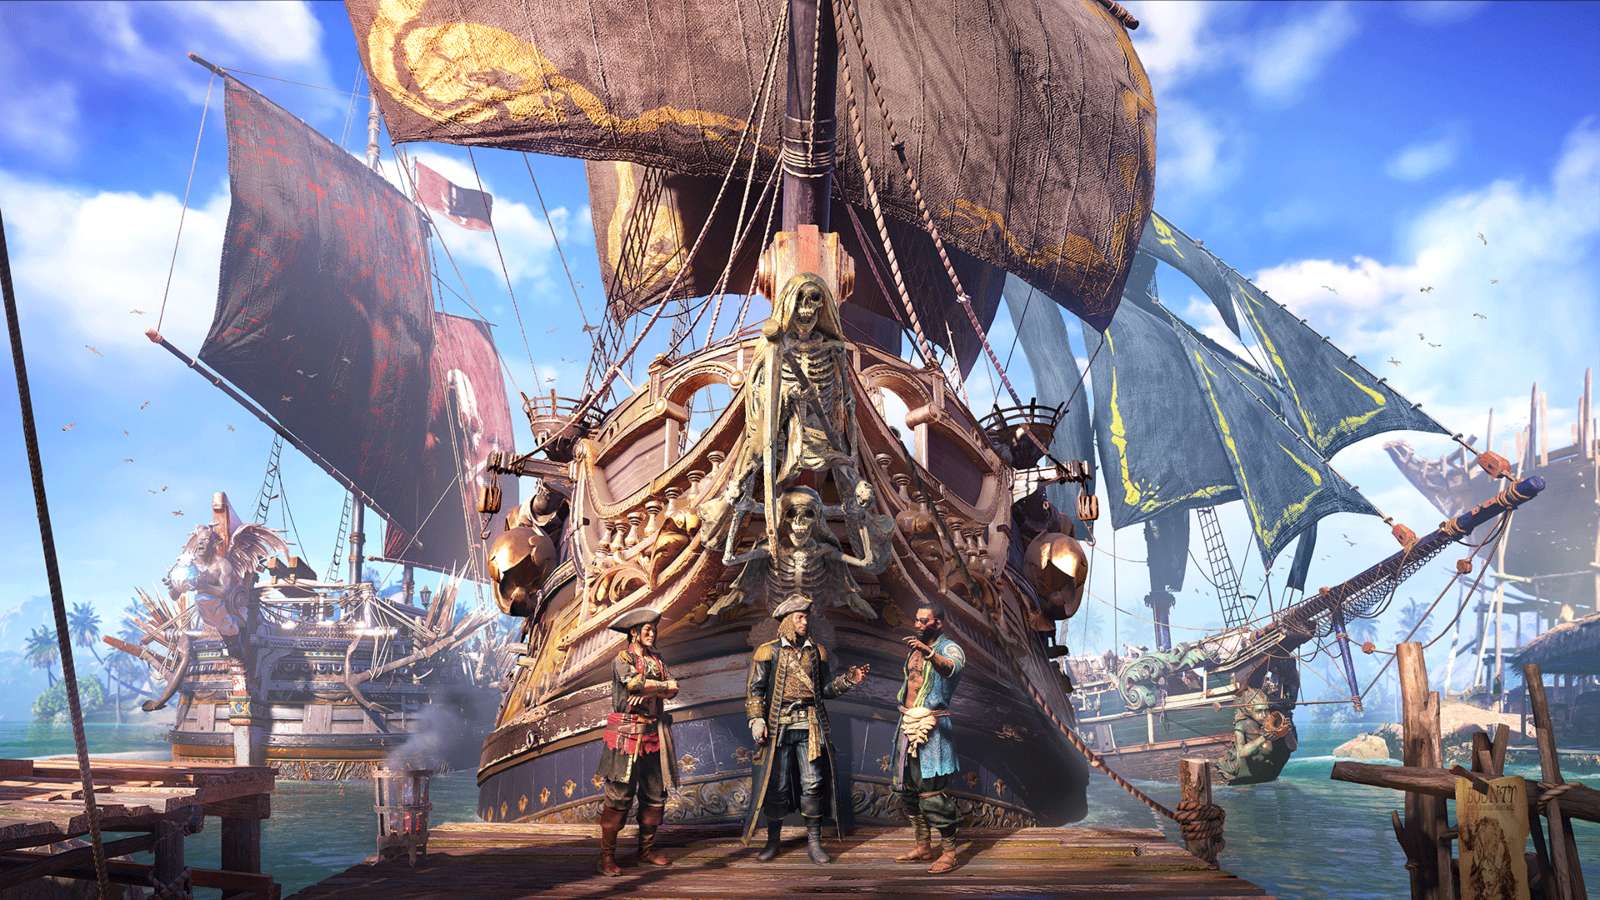 Three pirates standing in front of ships in Skull and Bones